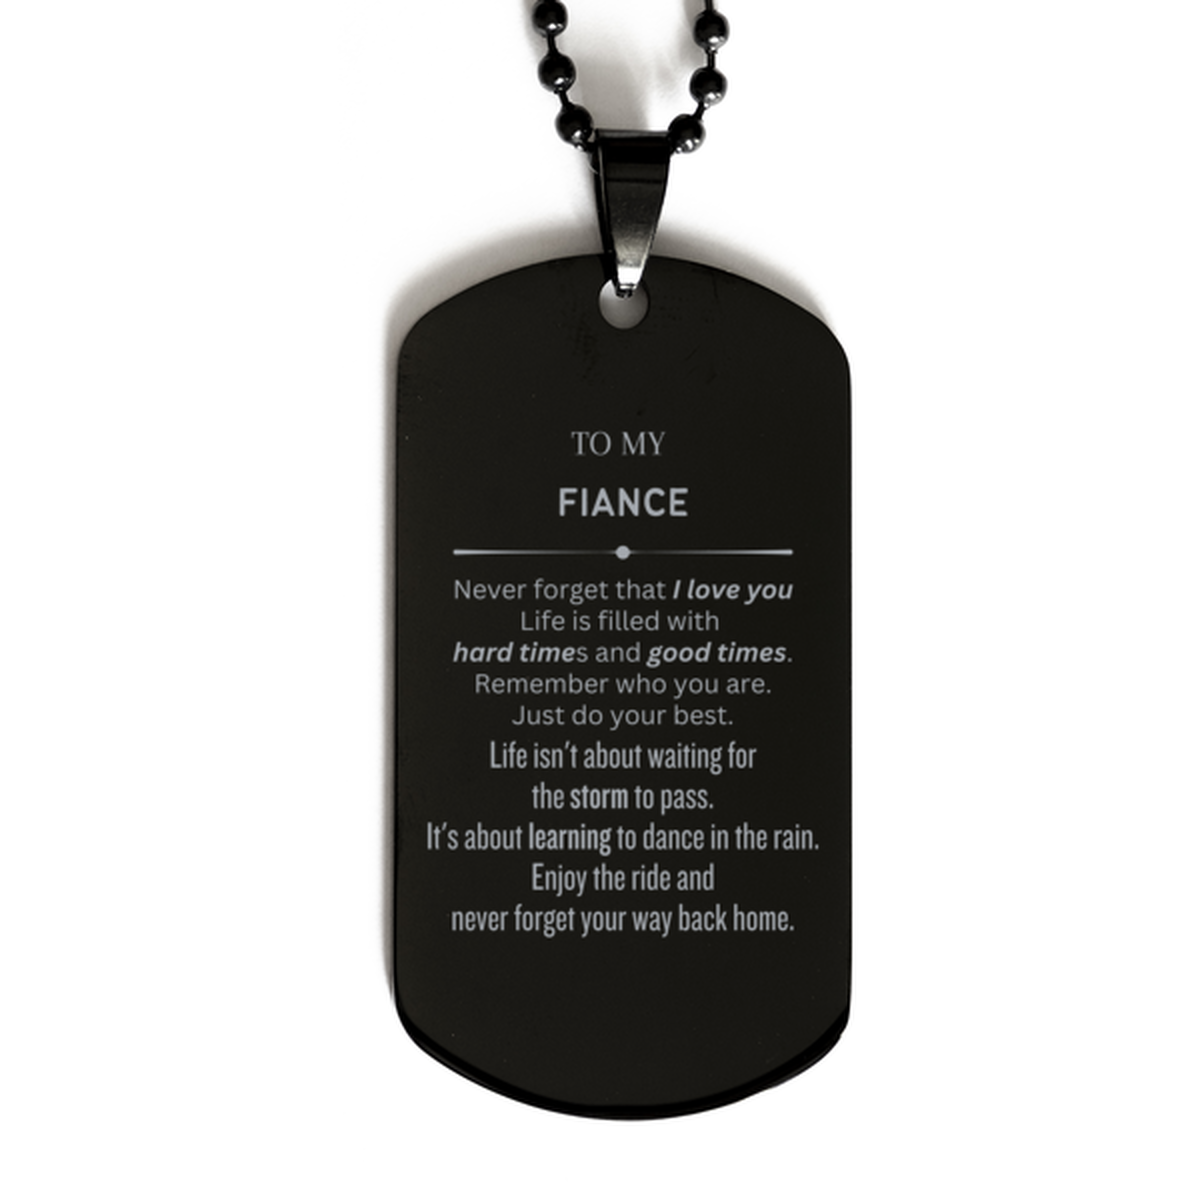 Christmas Fiance Black Dog Tag Gifts, To My Fiance Birthday Thank You Gifts For Fiance, Graduation Unique Gifts For Fiance To My Fiance Never forget that I love you life is filled with hard times and good times. Remember who you are. Just do your best